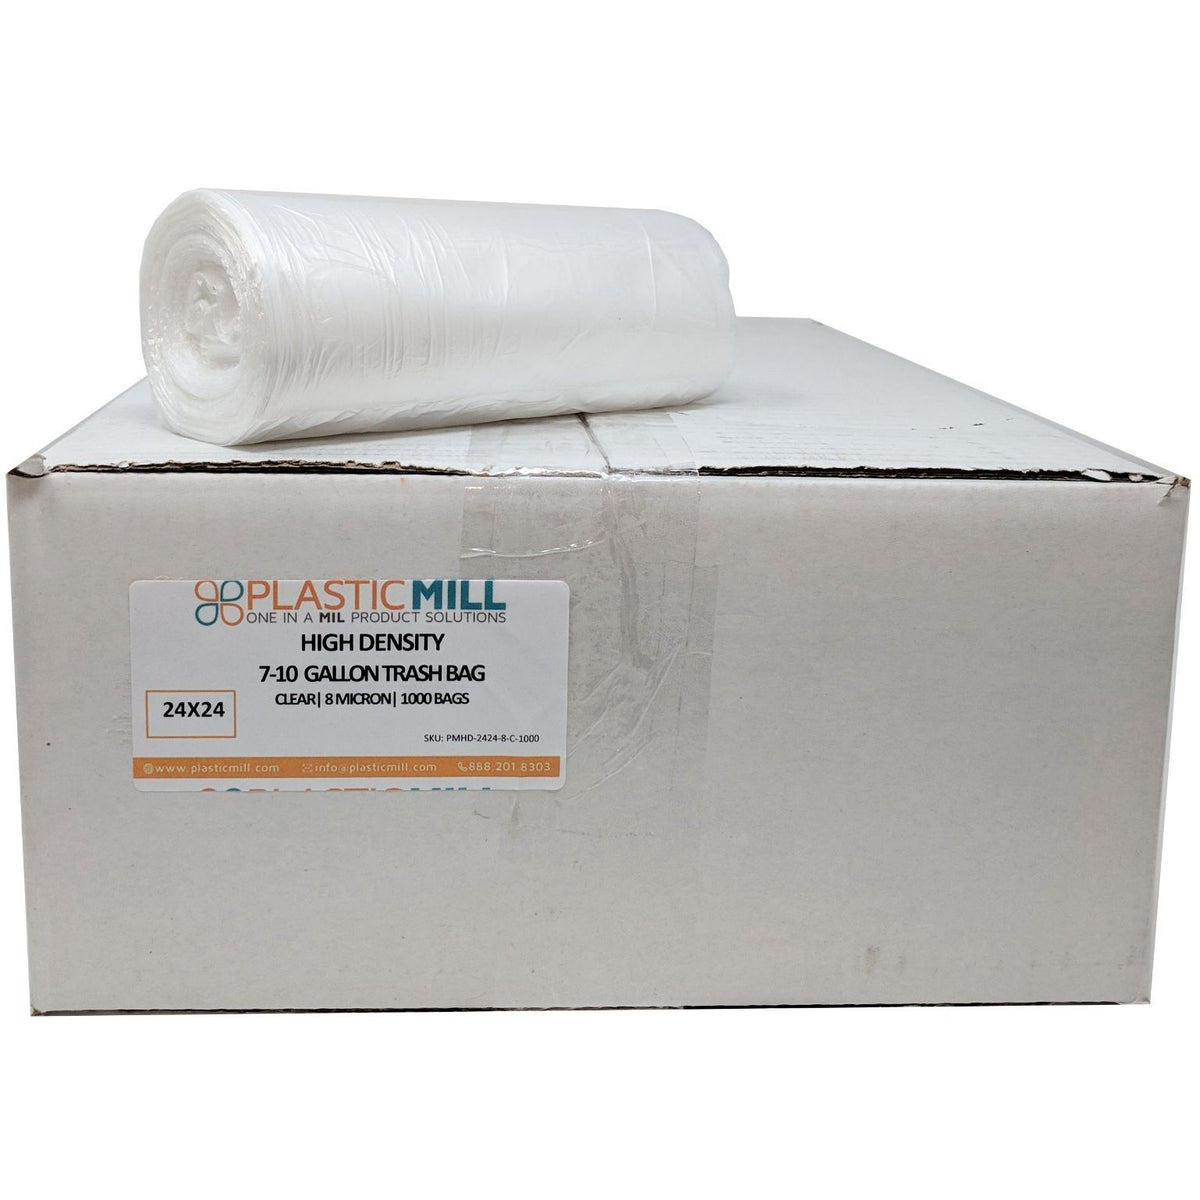 Commercial trash bags 10 gallon 24x23 5 mic case of 1000